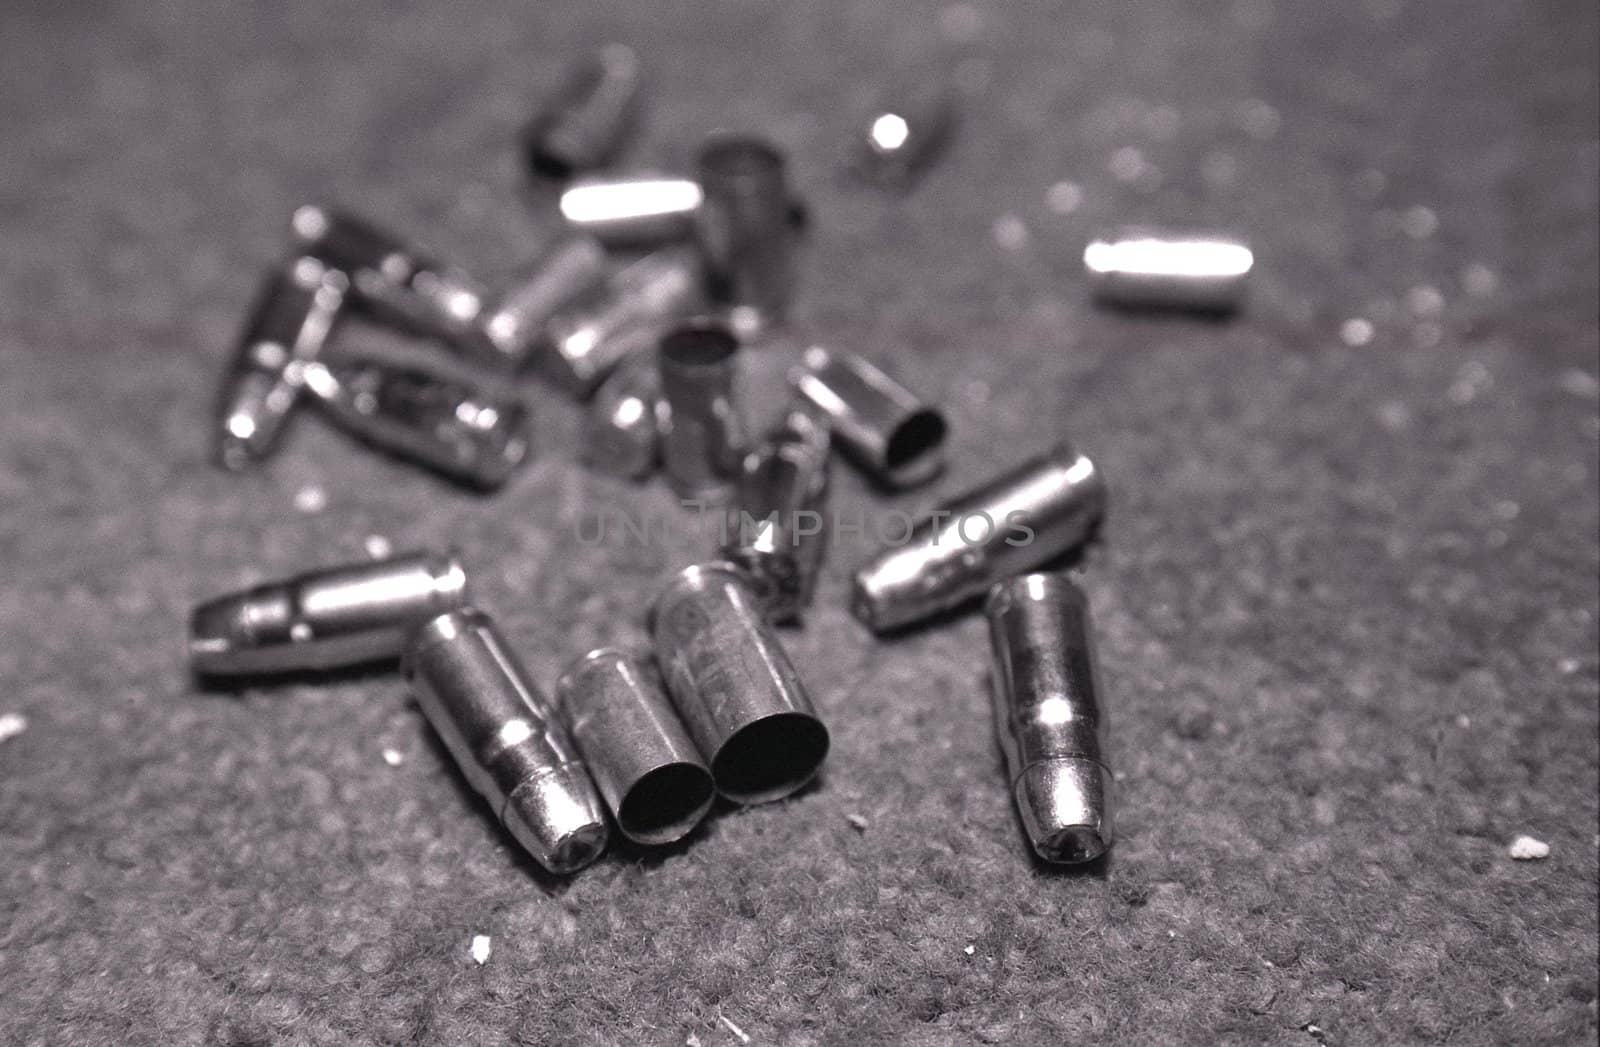 Close up of spent bullets and shells on grey
